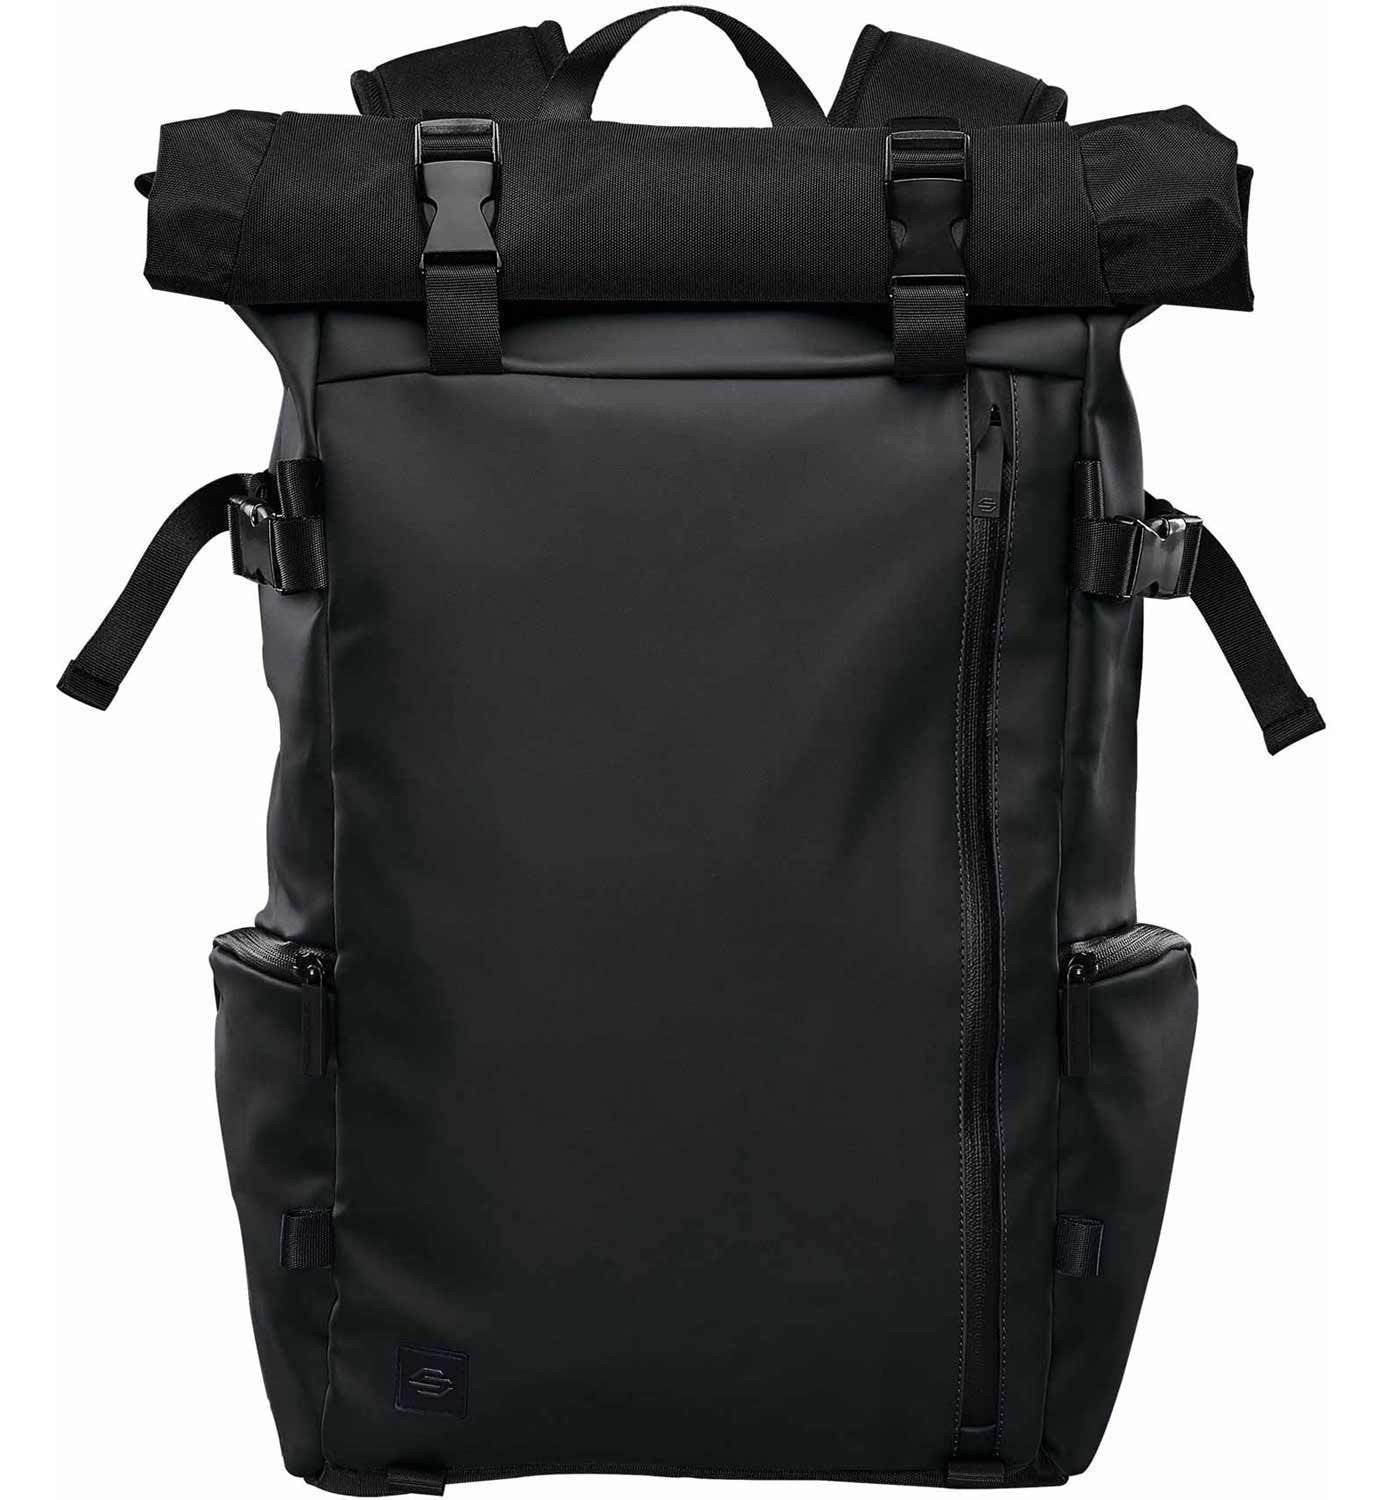 RTB-1 Norseman Roll Pack Top